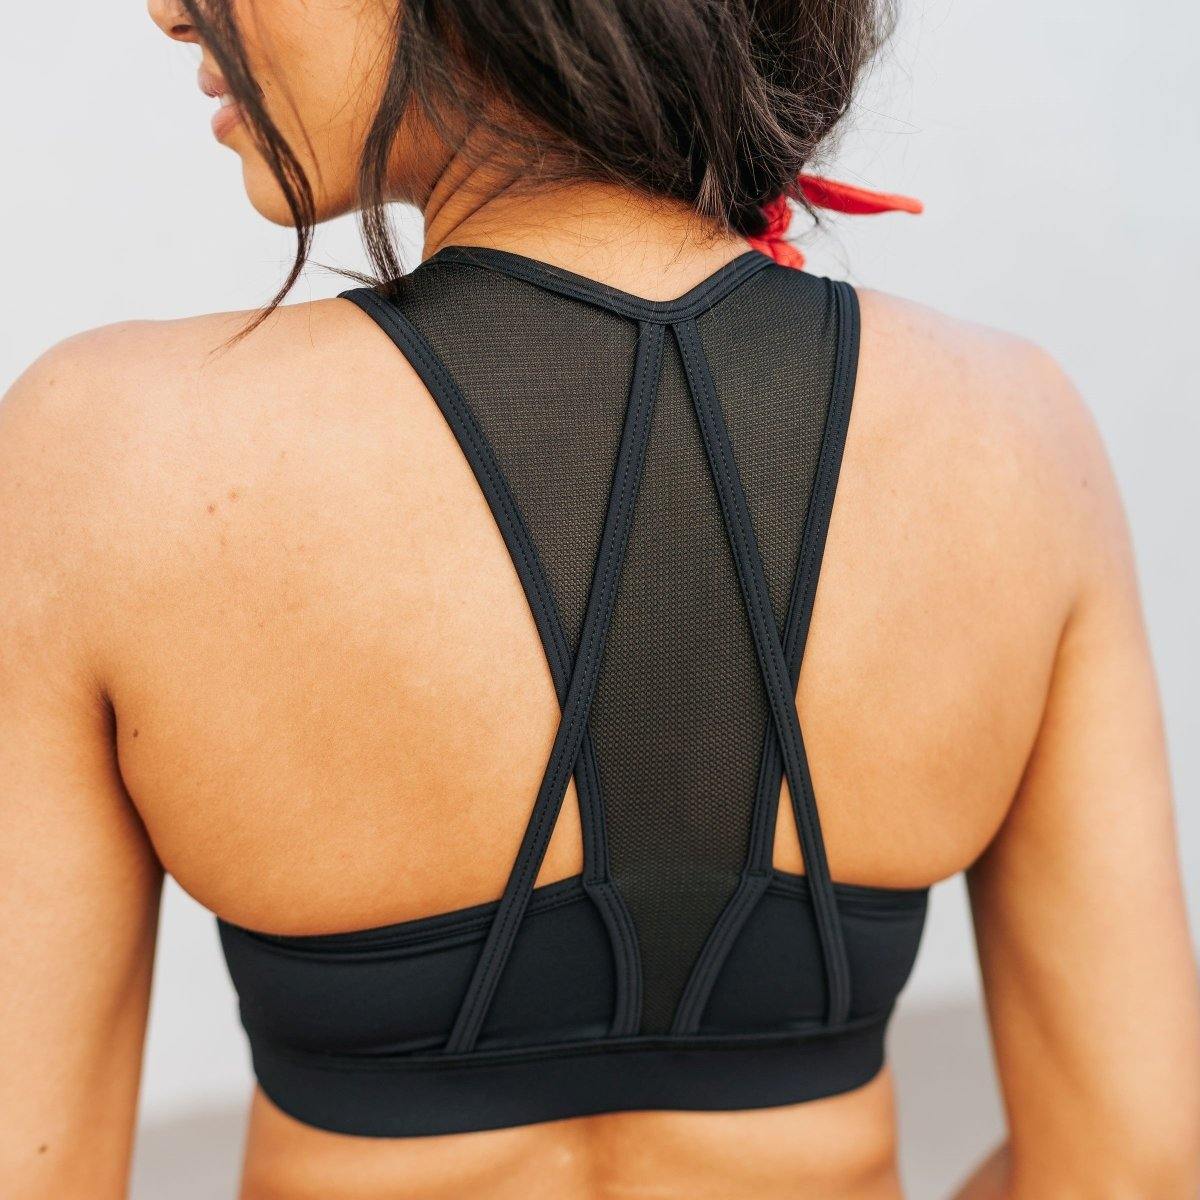 We just launched our newest bra: THE - Senita Athletics